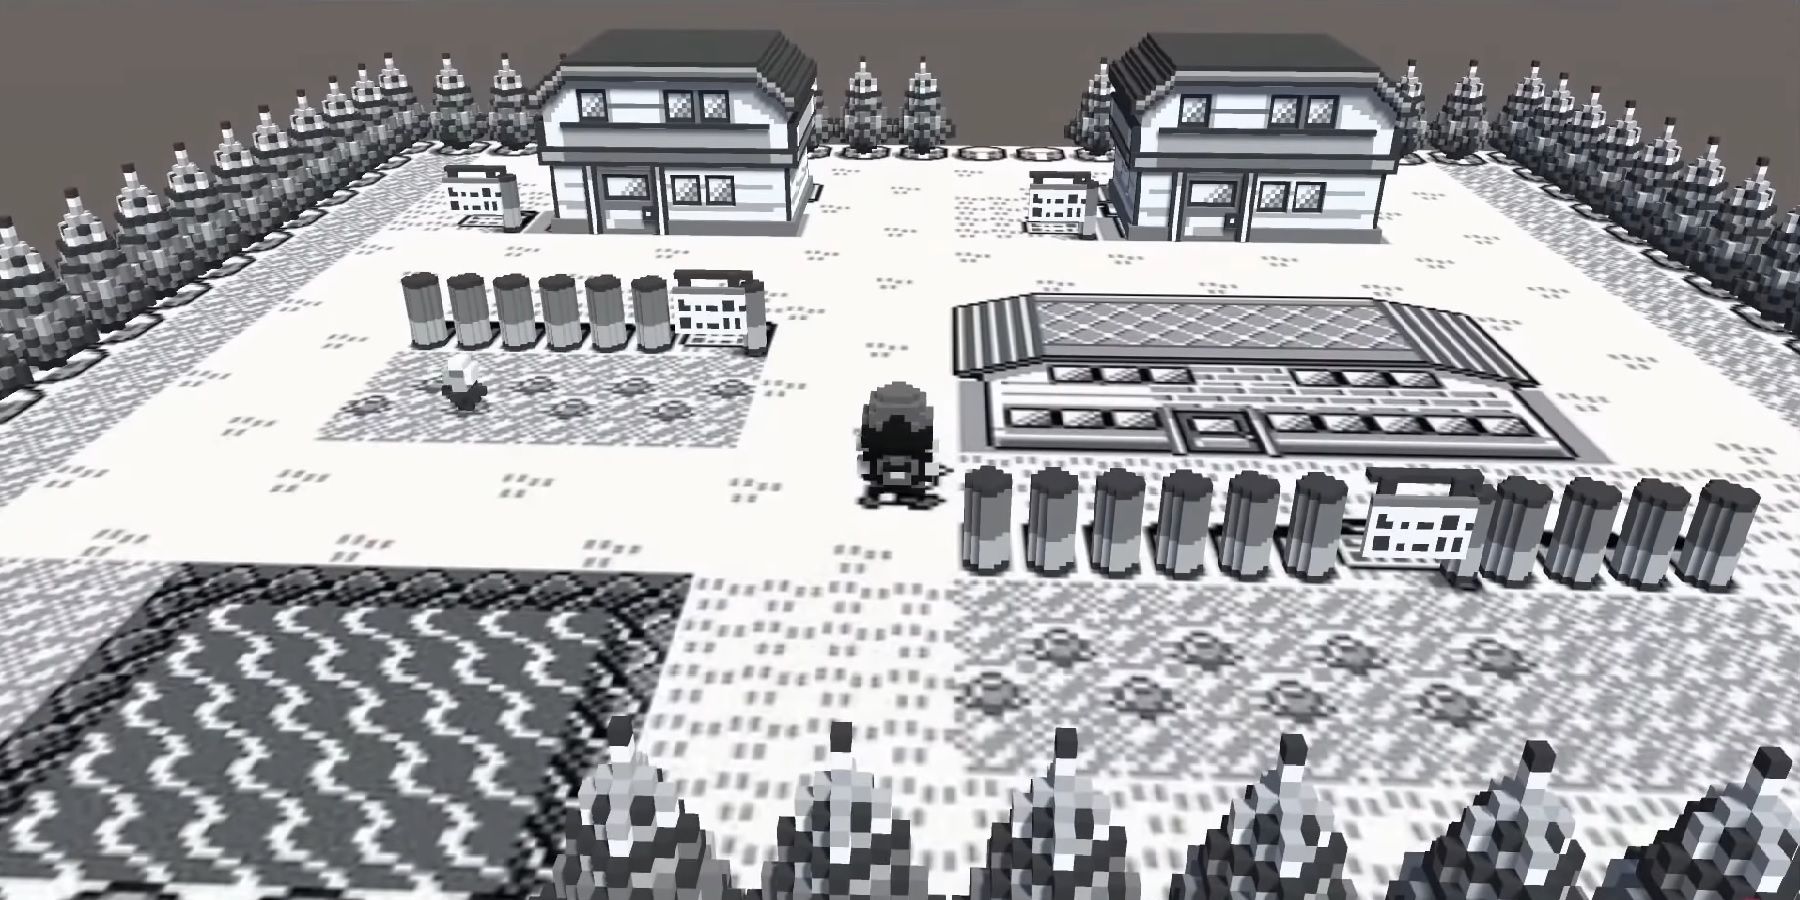 This is What a 'Pokémon Red and Blue' Remake Could Look Like